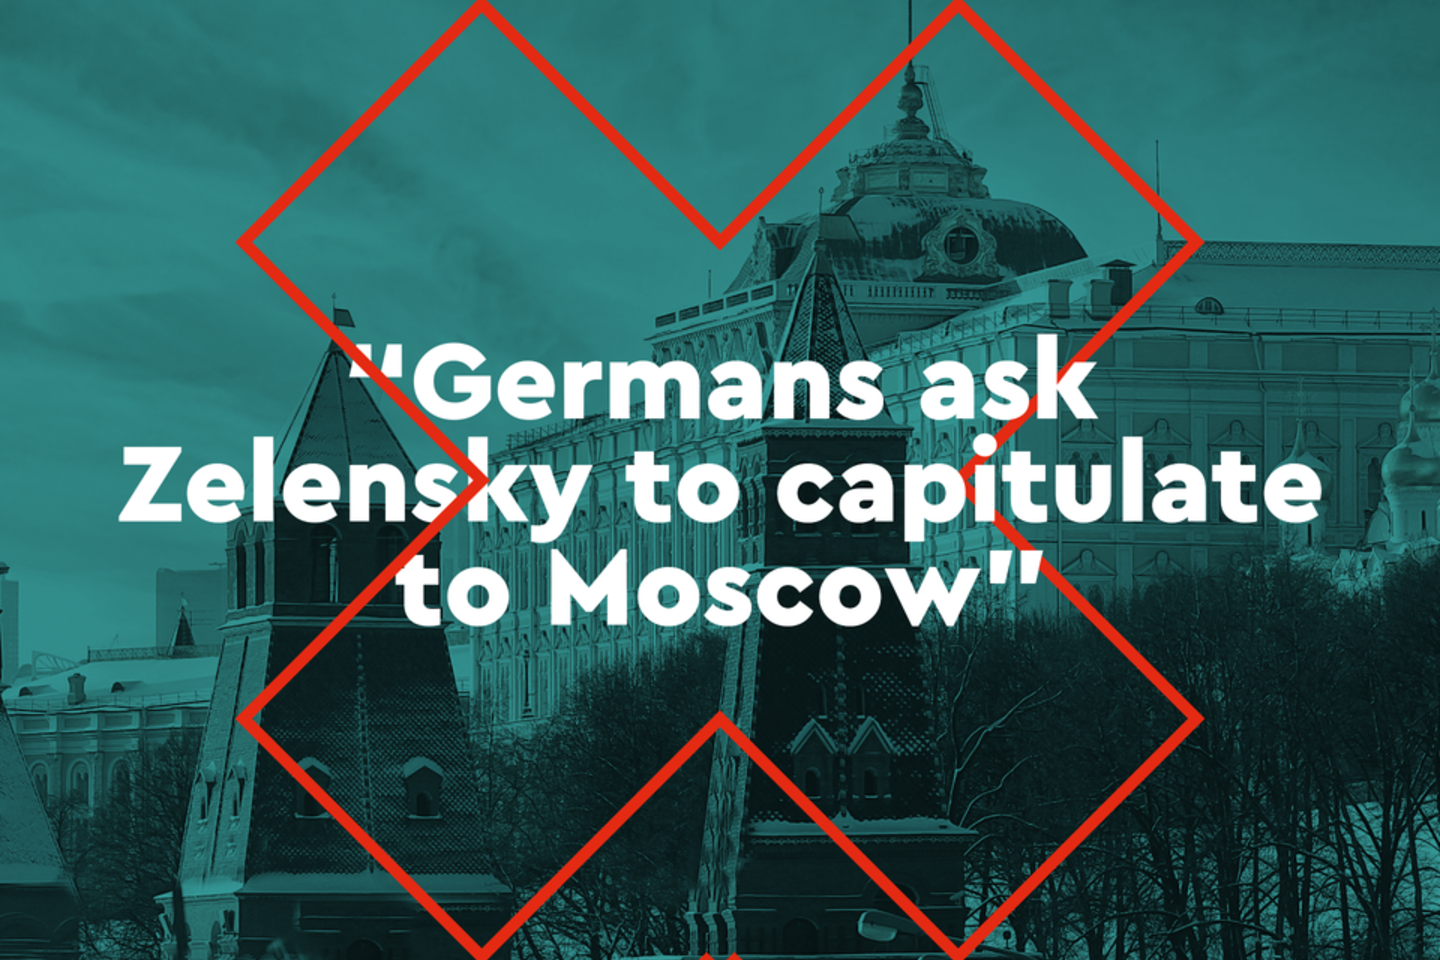 Propaganda message: „Germans ask Zelensky to capitulate to Moscow“.